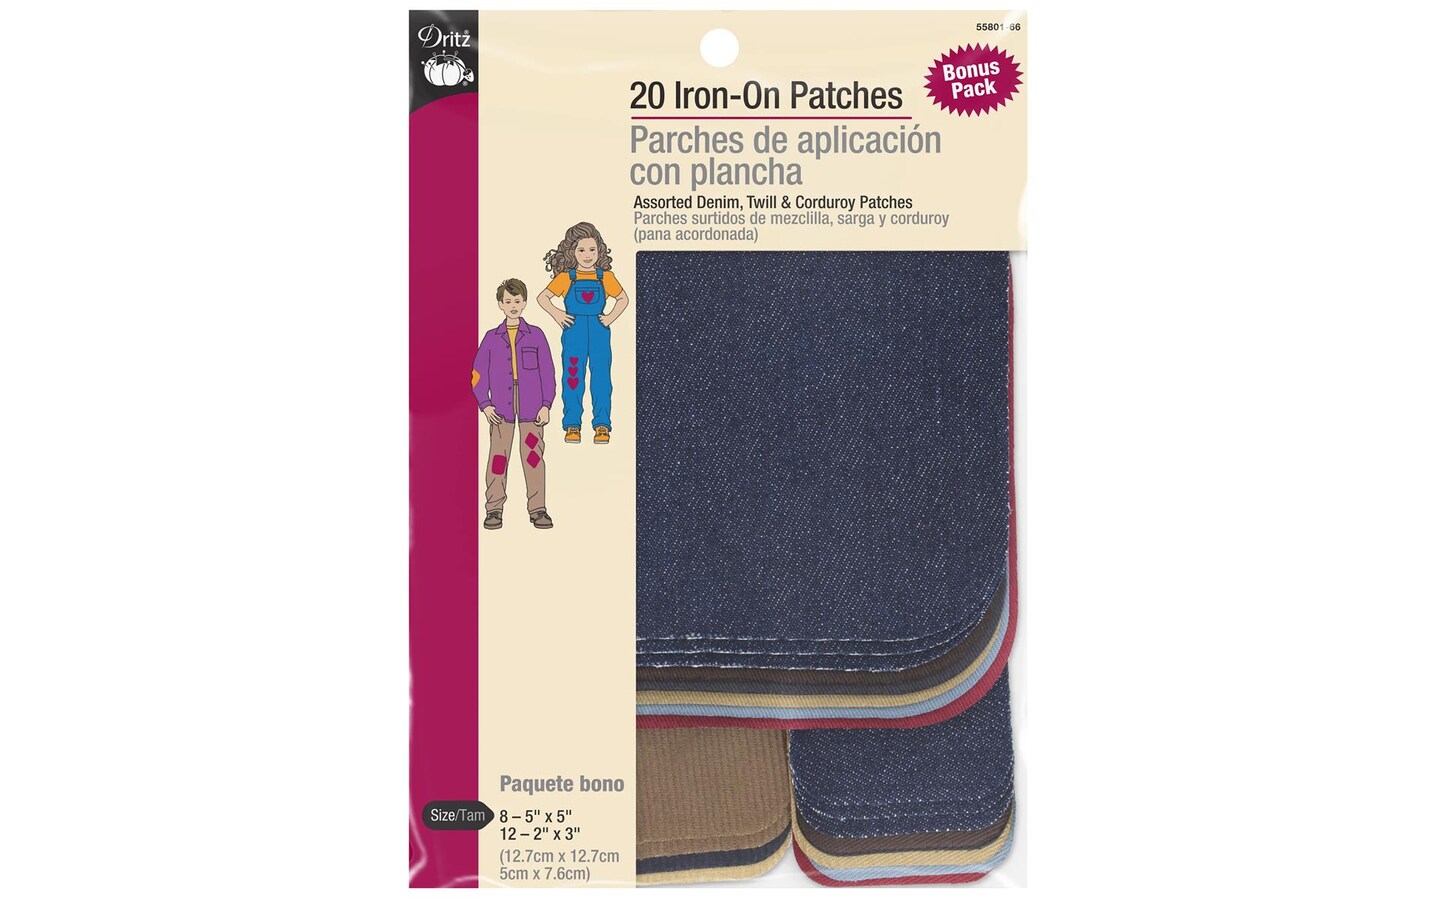 Dritz Patch Iron On Assorted 20pc